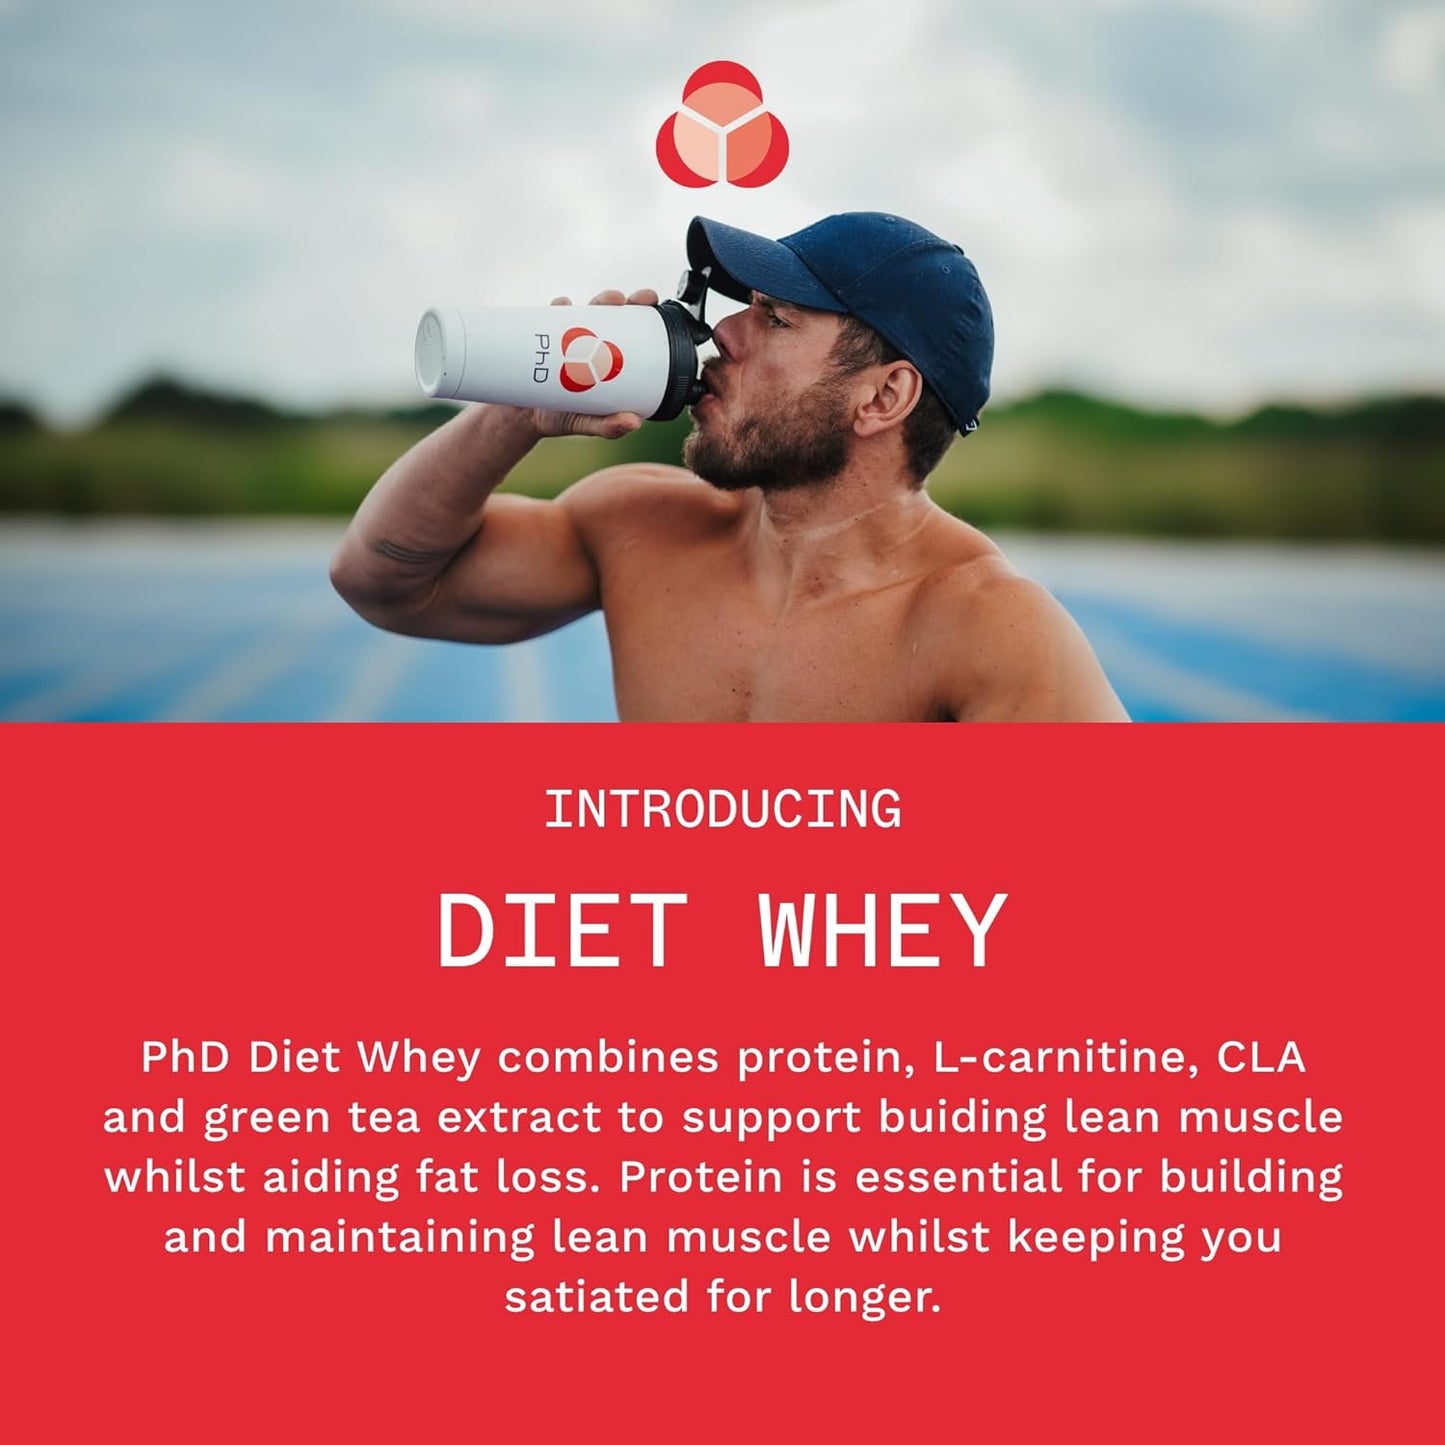 Nutrition Diet Whey Low Calorie Protein Powder, Low Carb, High Protein Lean Matrix, Chocolate Peanut Butter Protein Powder, High Protein, 40 Servings per 1 Kg Bag